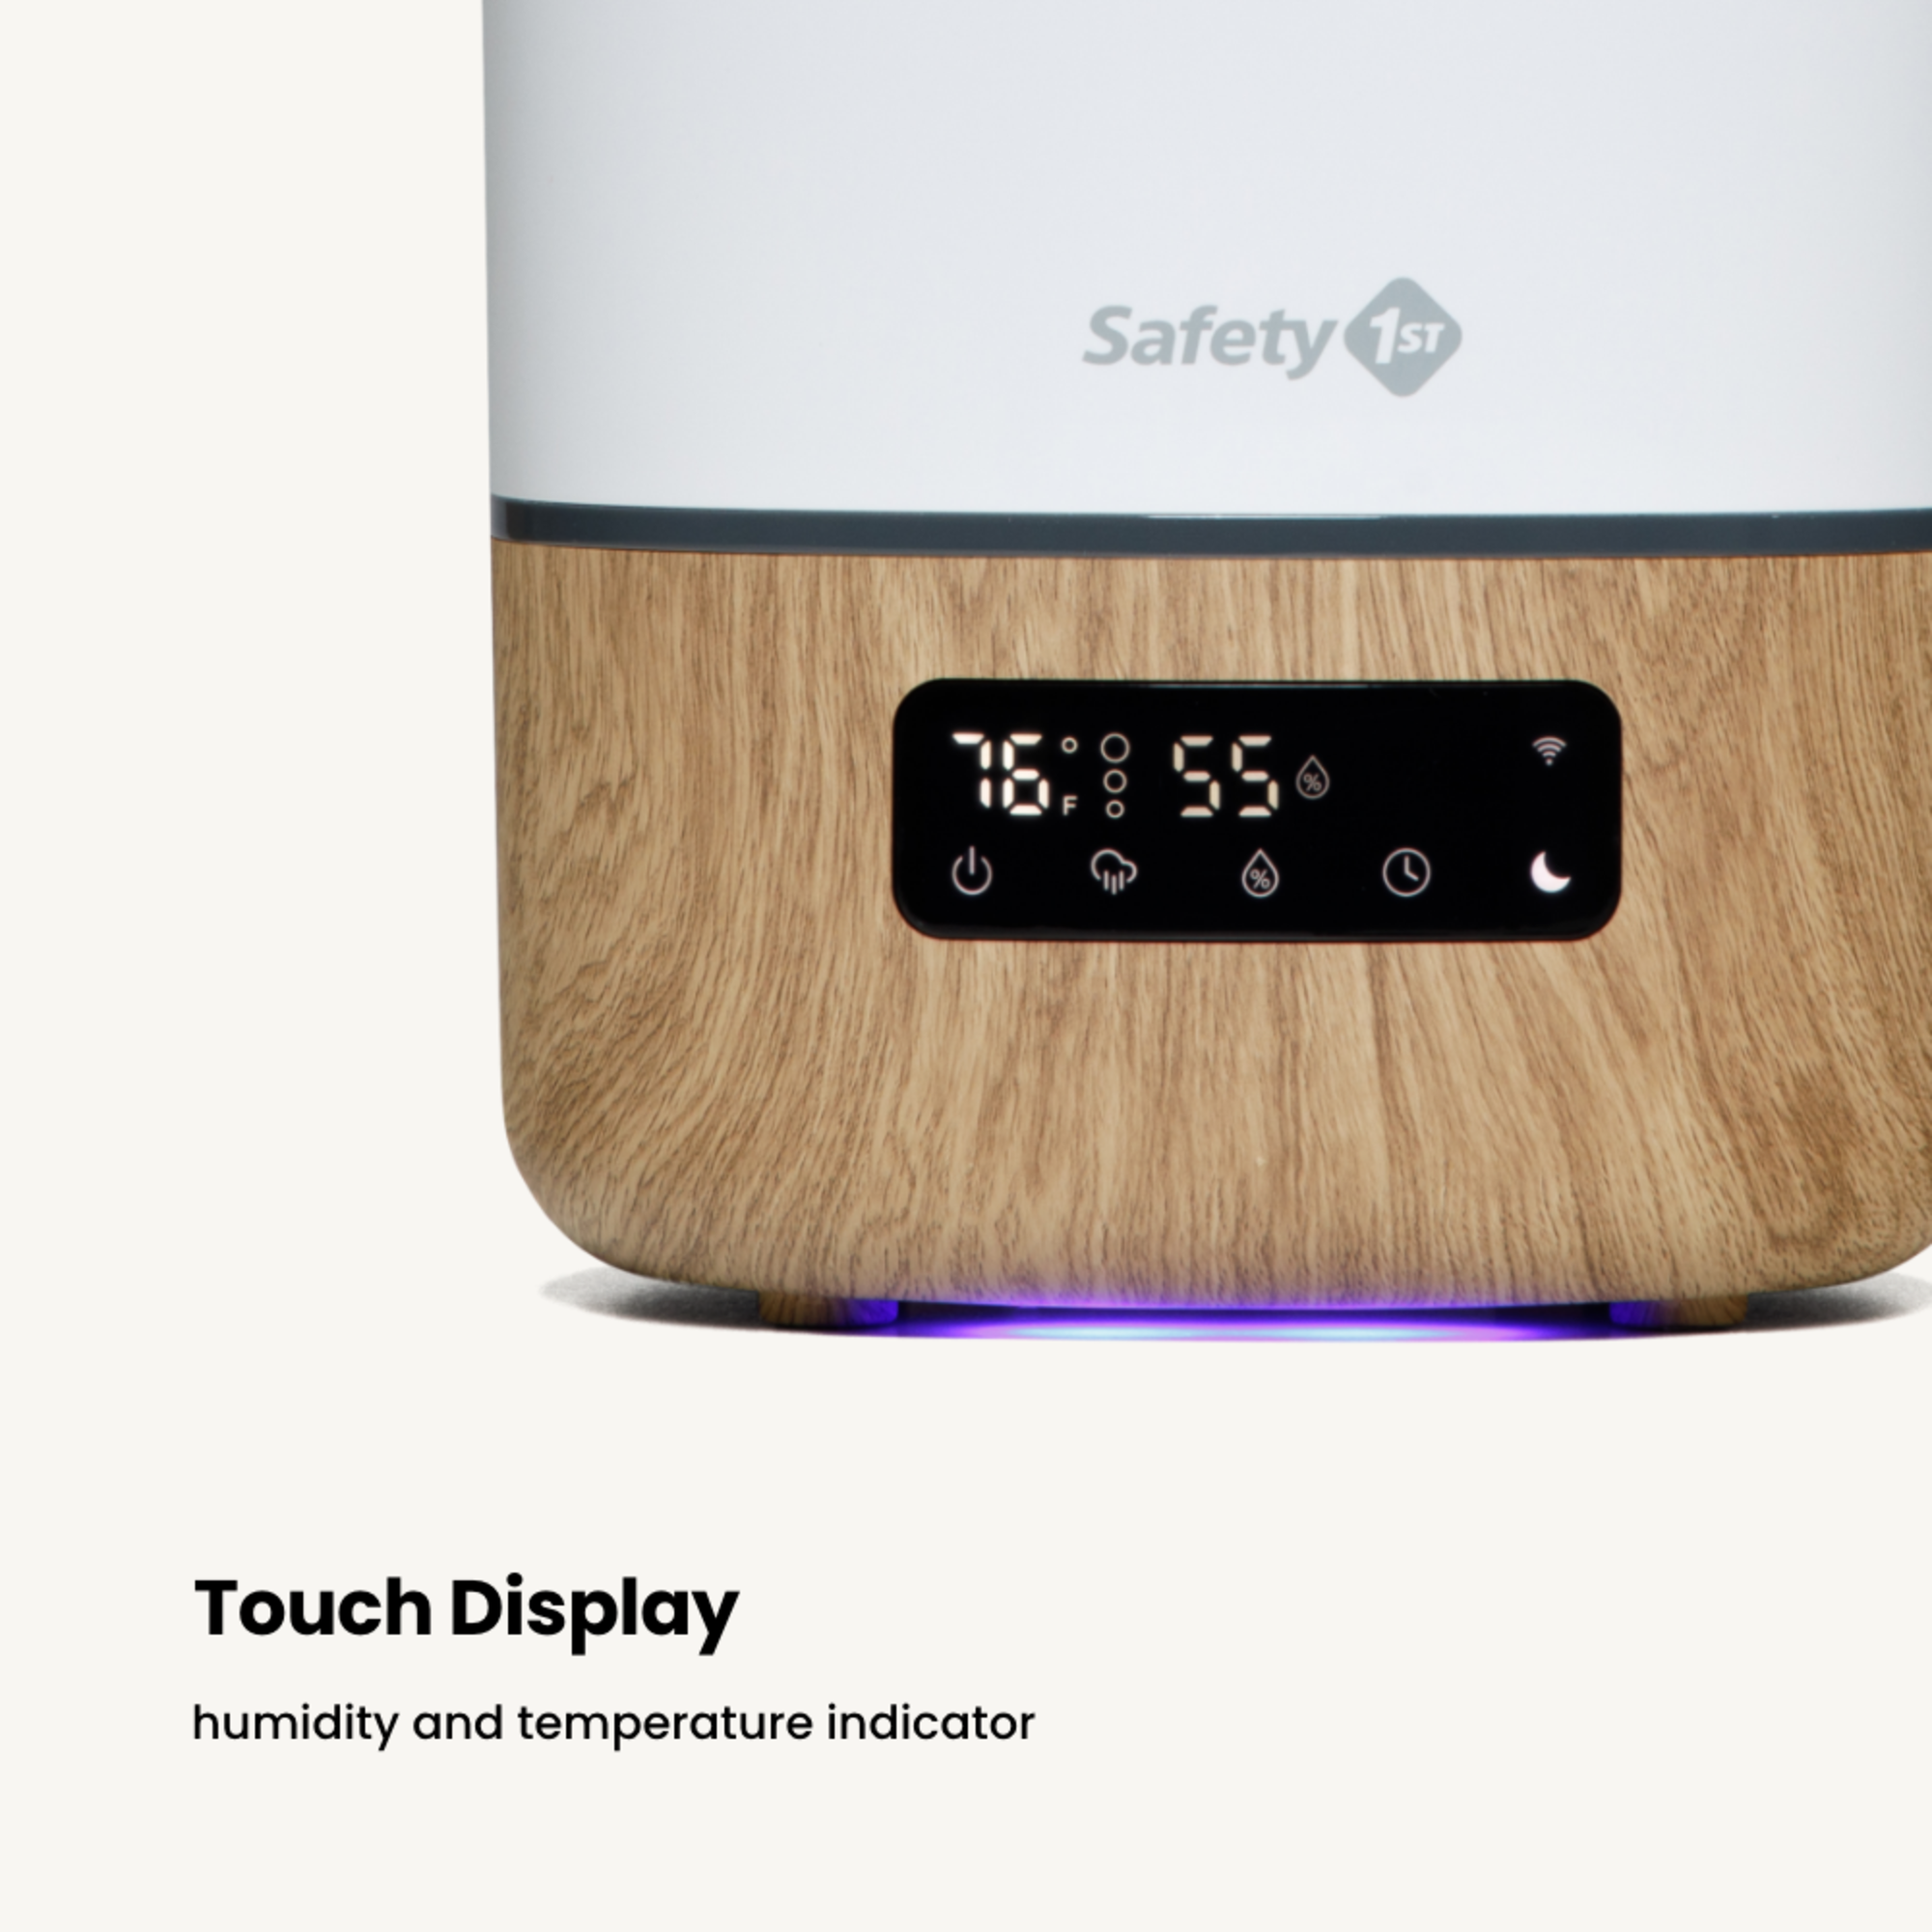 Shows suite of Connected Nursery products - Add to Your Connected Suite - Soother, Under Crib Light, Dual Outlet, Humidifier & WiFi Baby Monitor